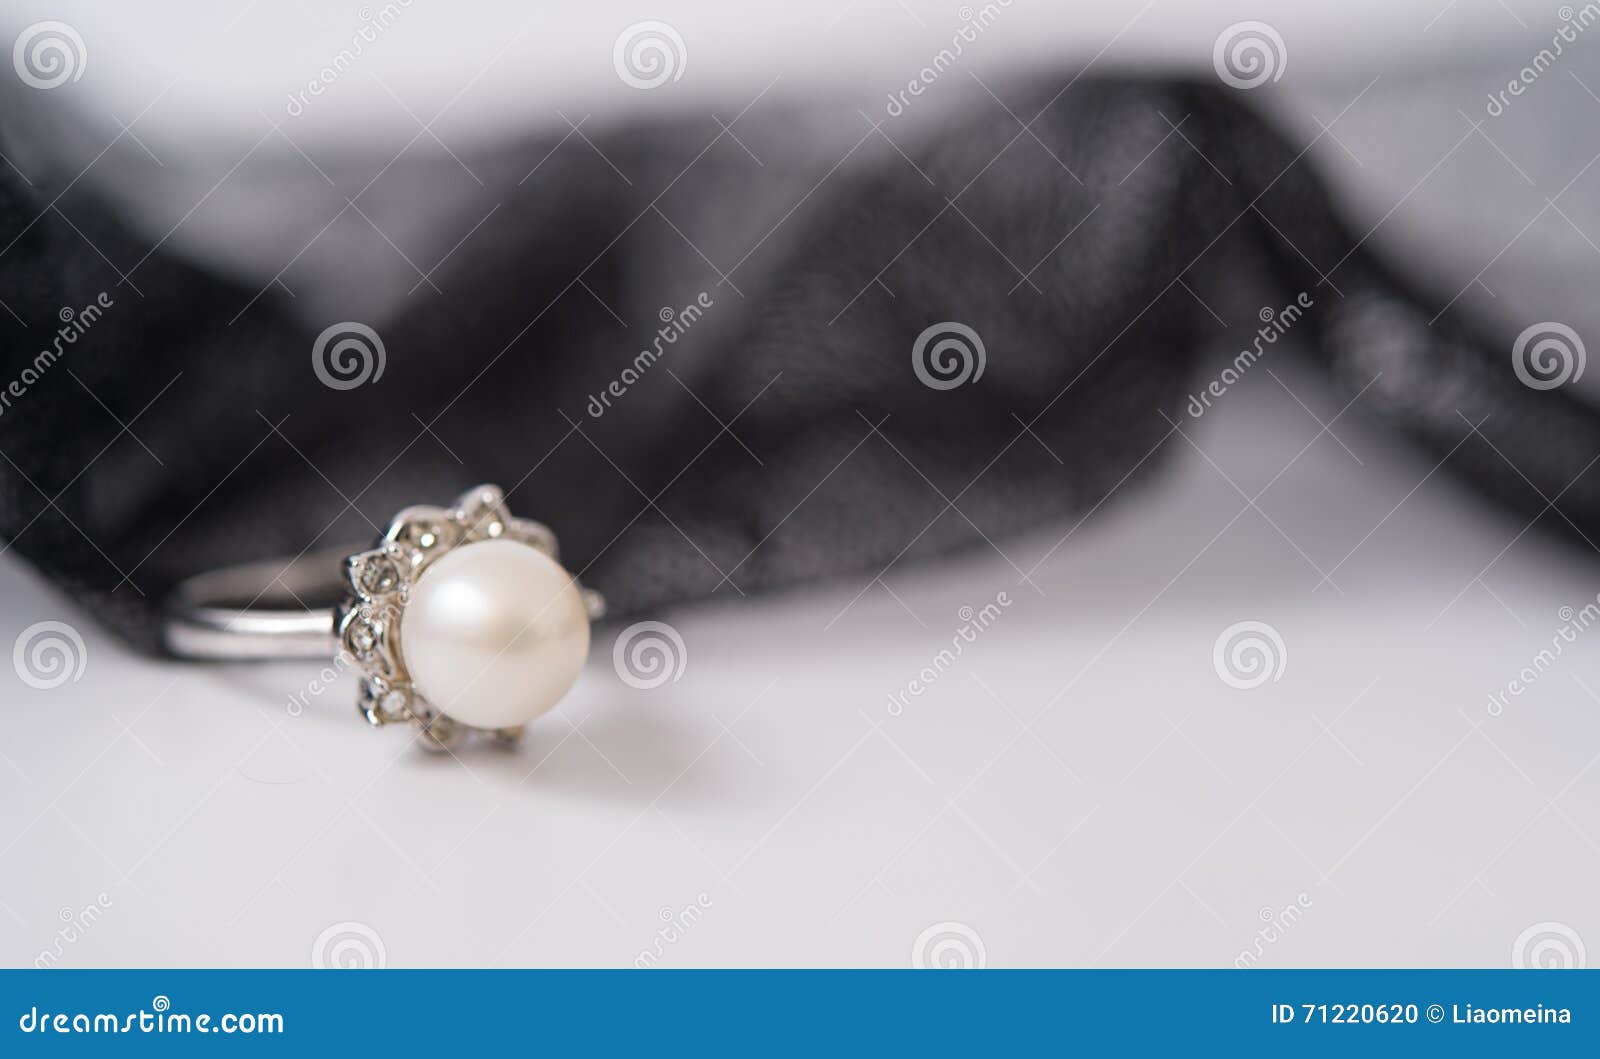 11.5mm Genuine Pearl Lace Craft Ring offers UK online